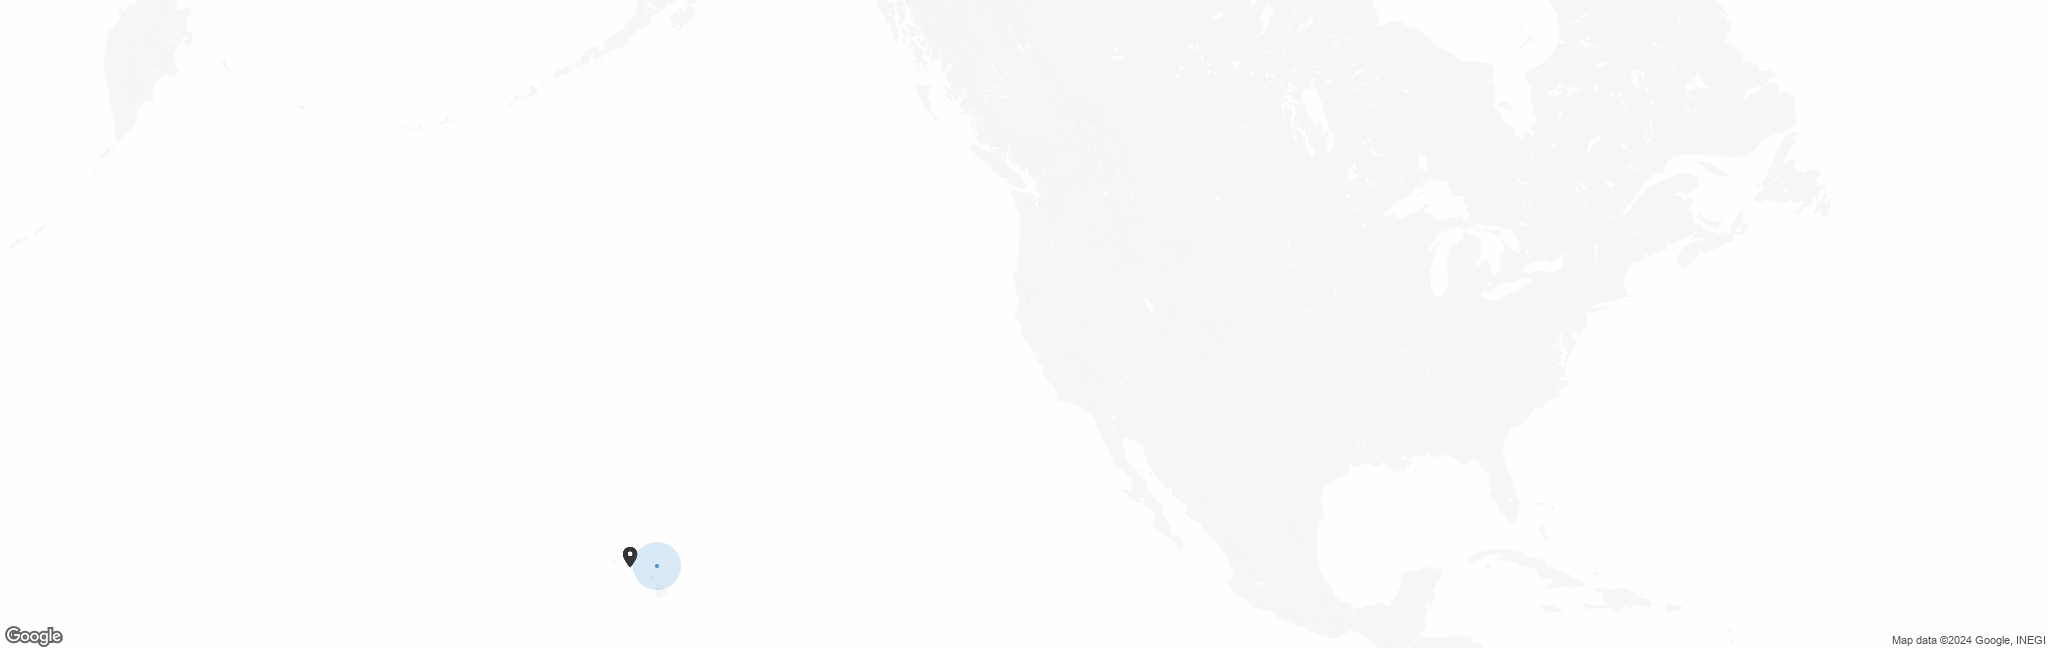 Map of US with pin of Hawaii SPCA location